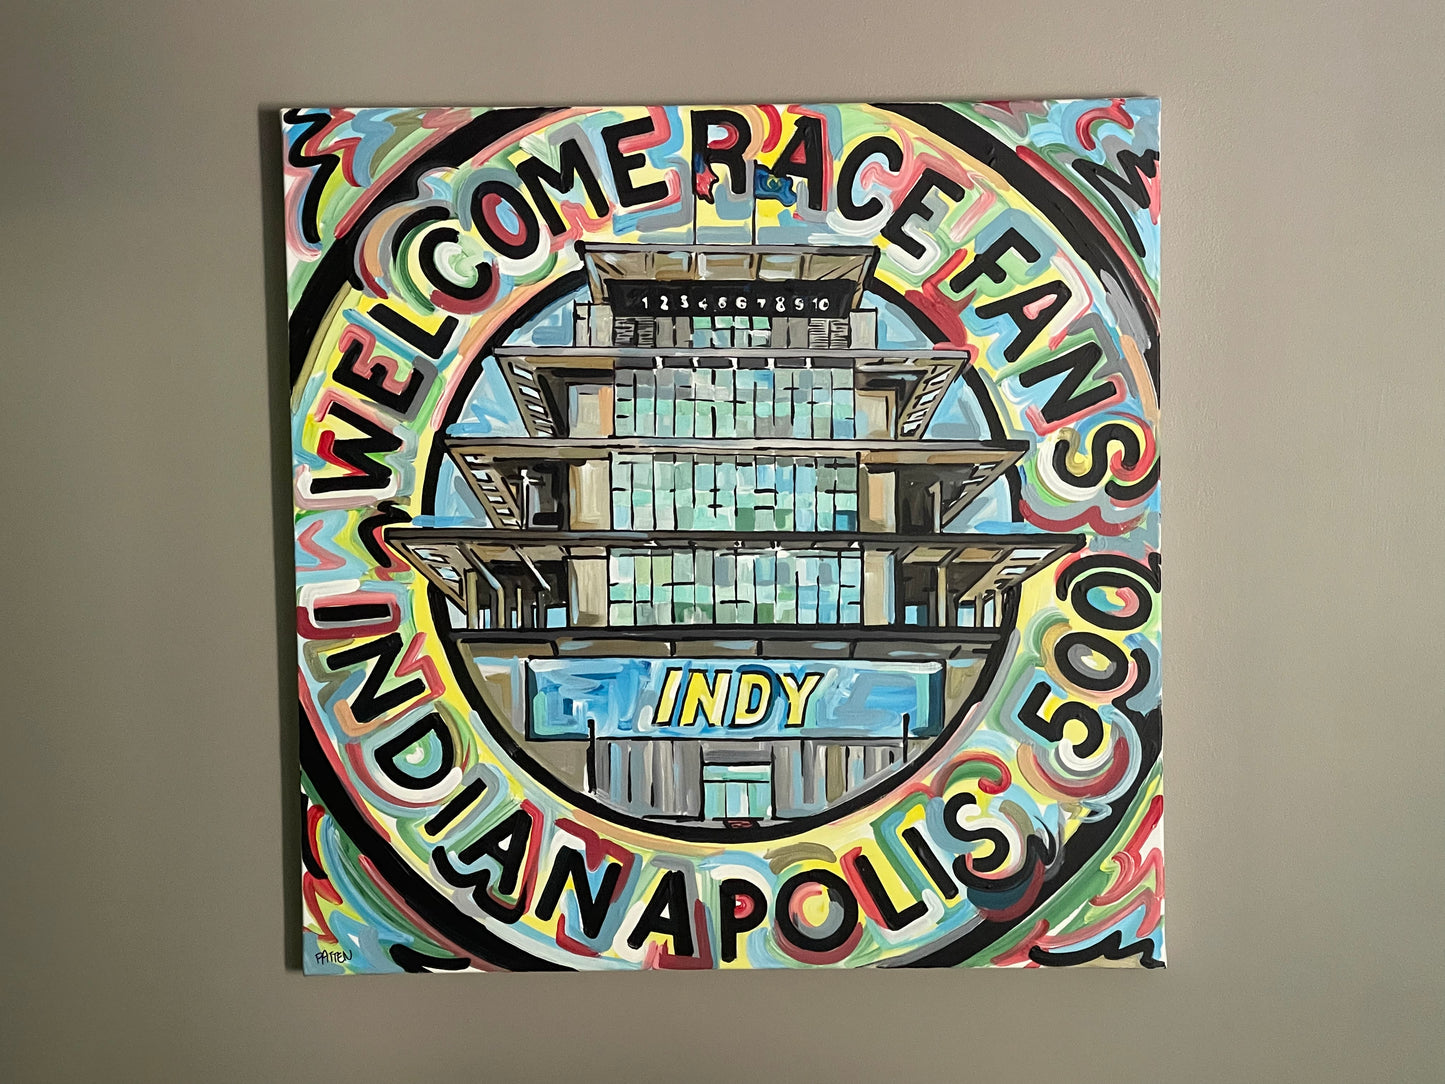 Original Welcome Race Fans Pagoda IMS Painting (30" x 30") by Justin Patten